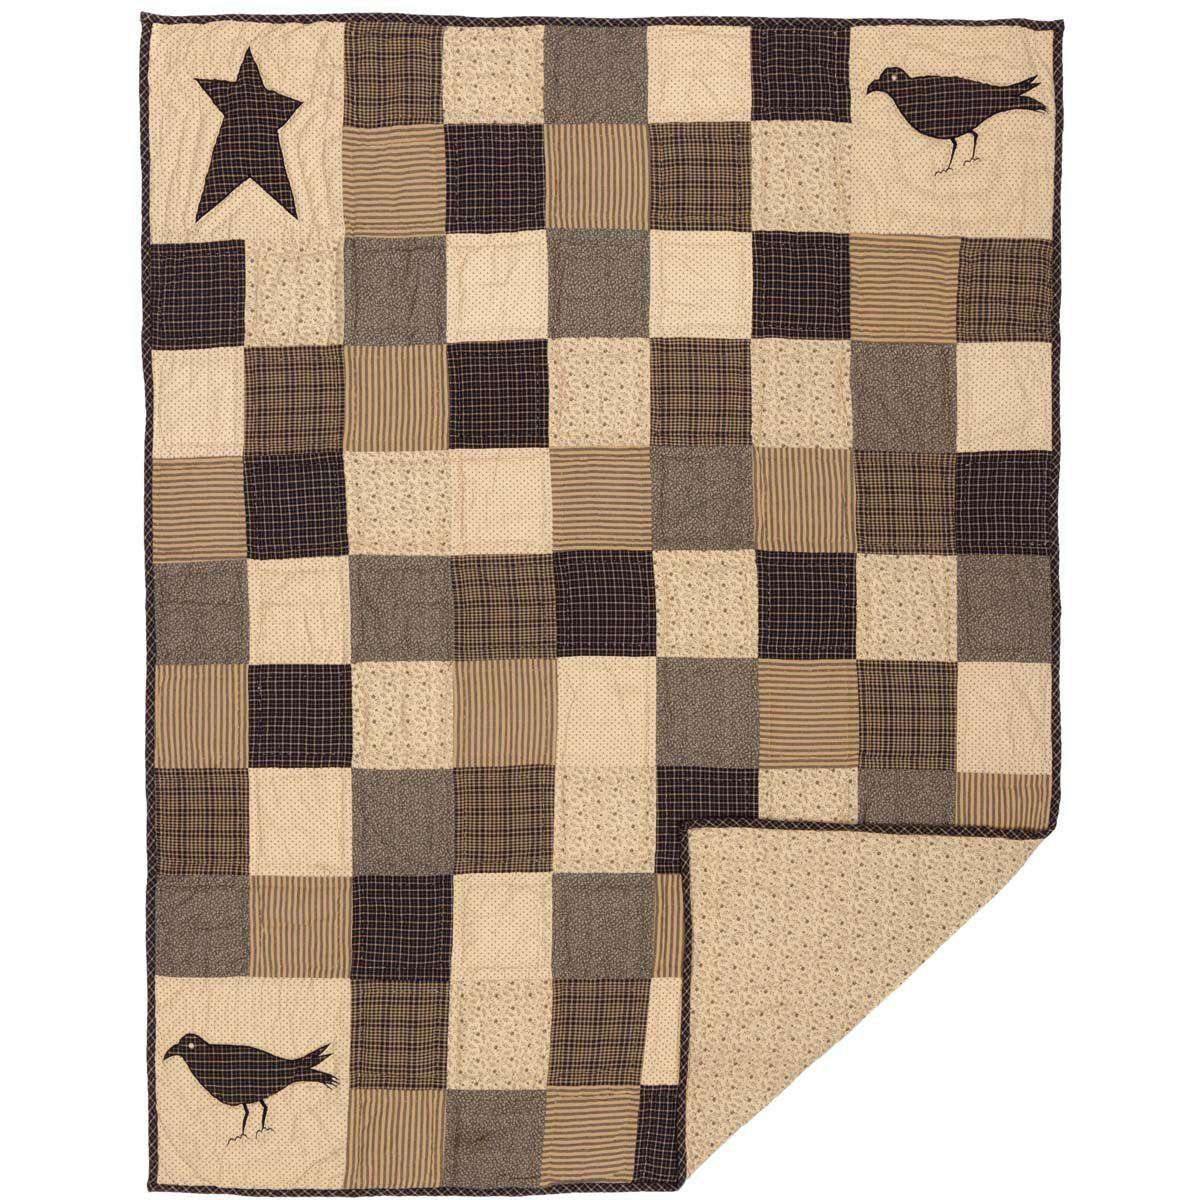 Kettle Grove Applique Crow and Star Quilted Throw 60x50 VHC Brands full